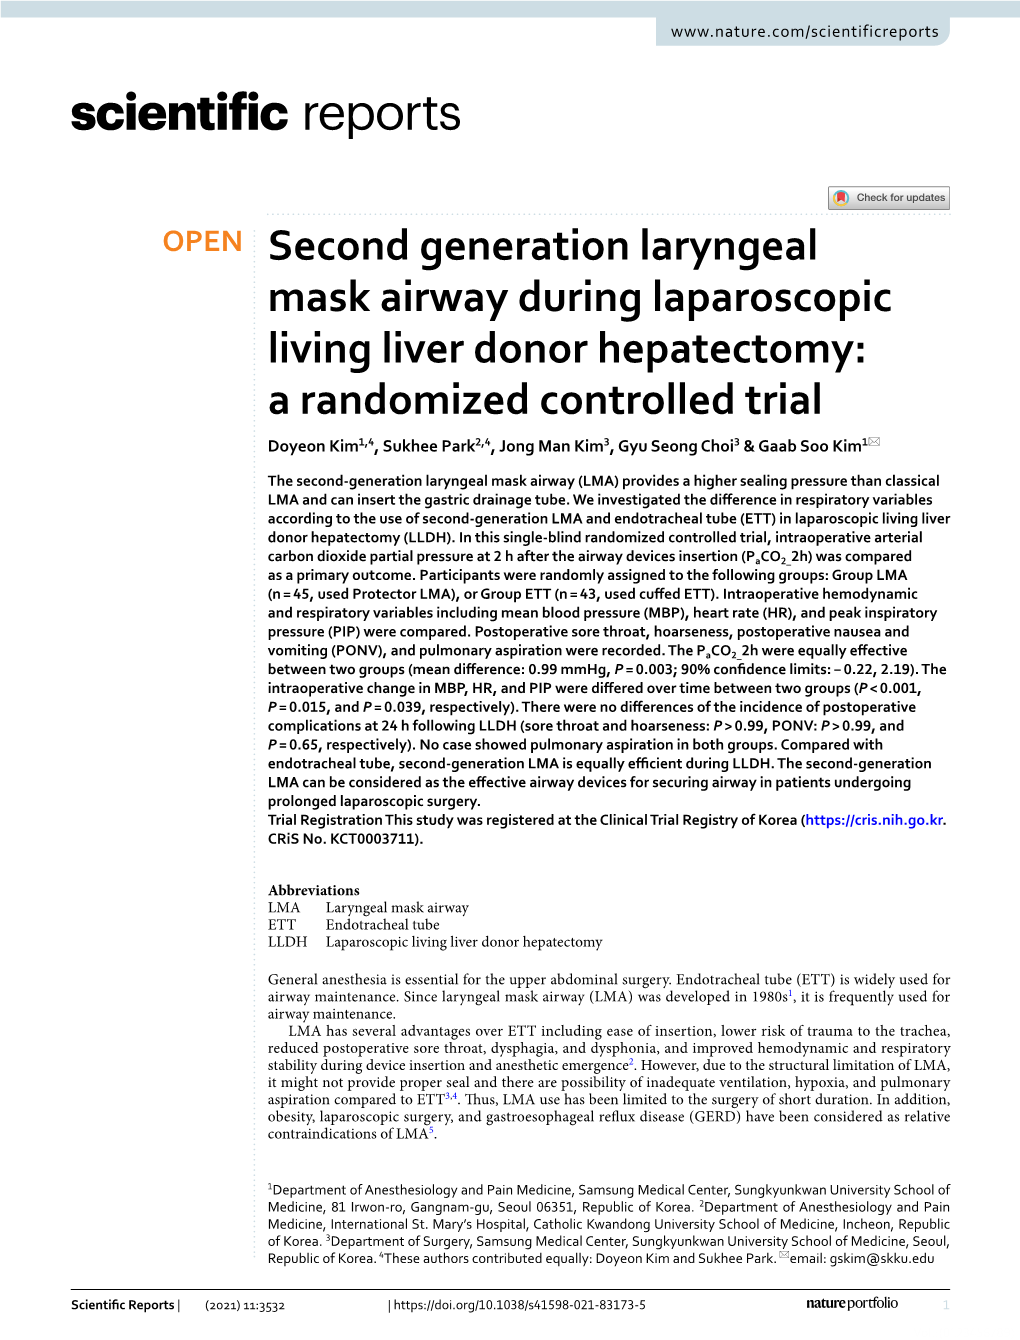 Second Generation Laryngeal Mask Airway During Laparoscopic Living Liver Donor Hepatectomy: a Randomized Controlled Trial